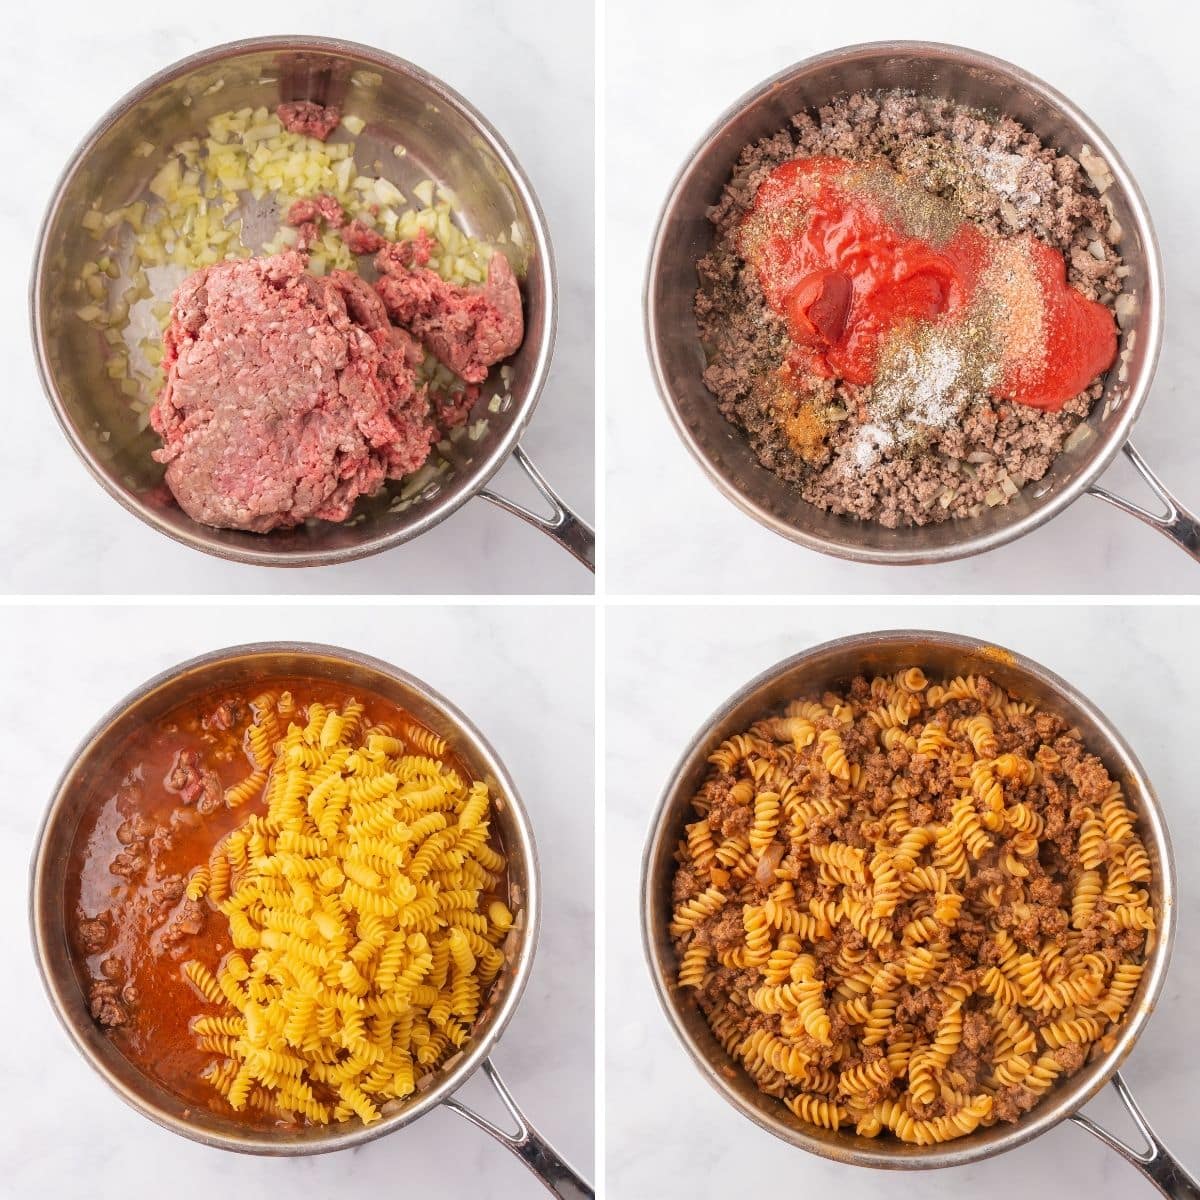 A step by step images showing how to brown beef and cook pasta.